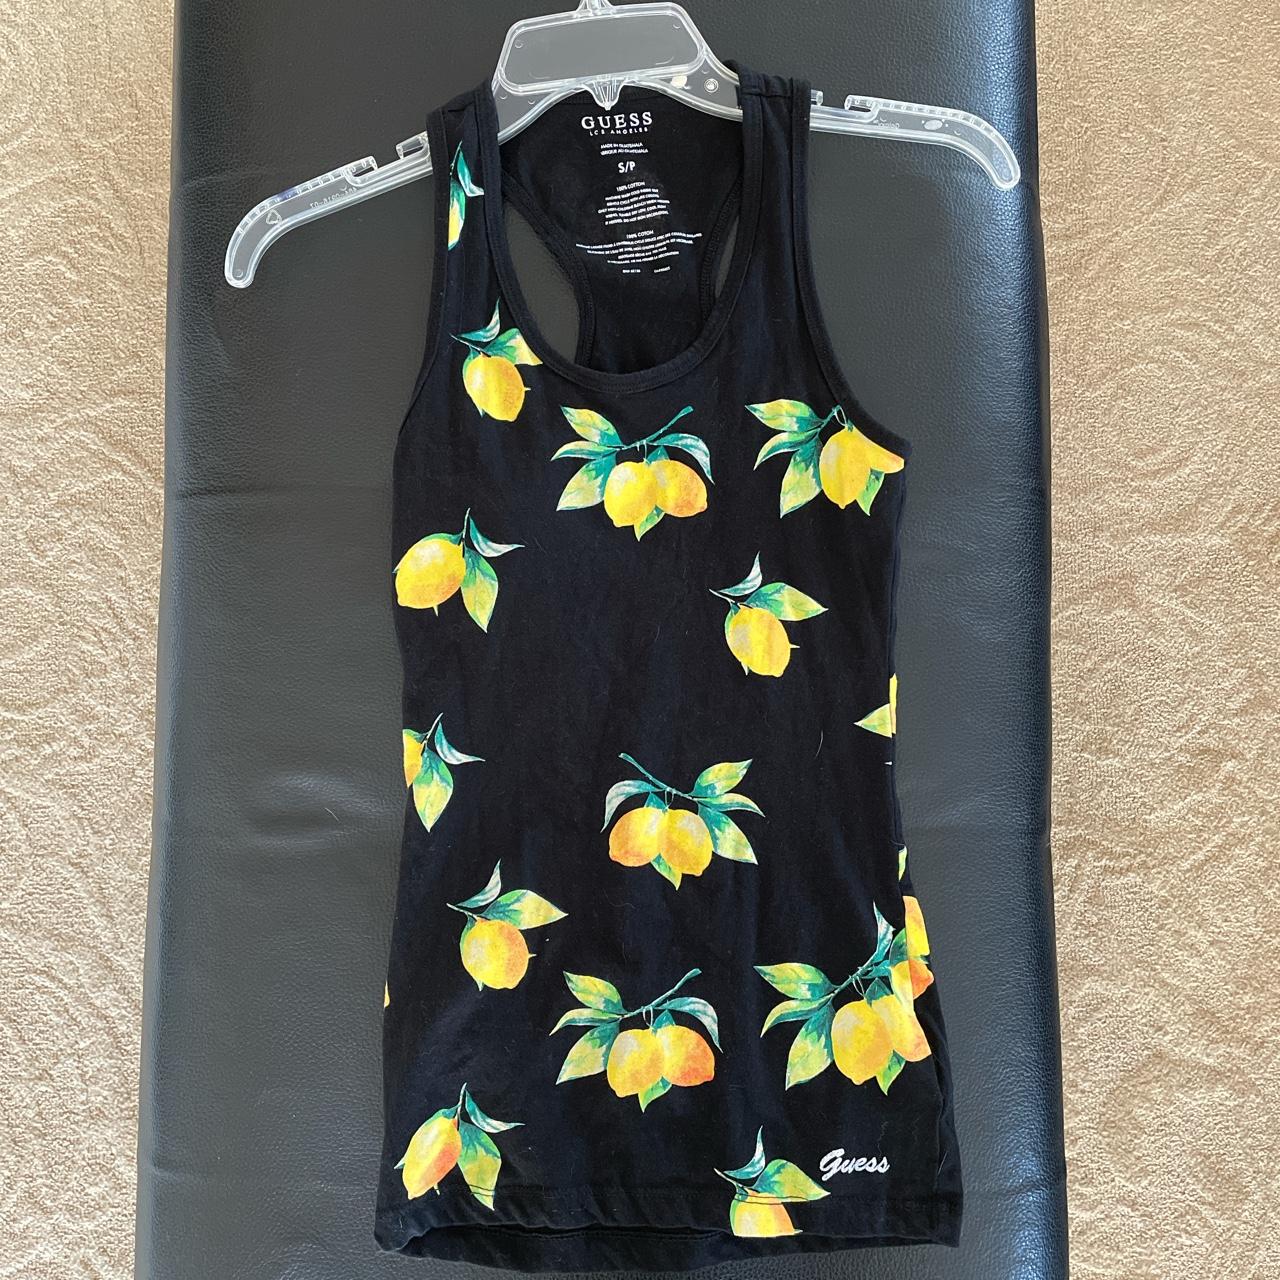 Guess Women's Black and Yellow Vests-tanks-camis